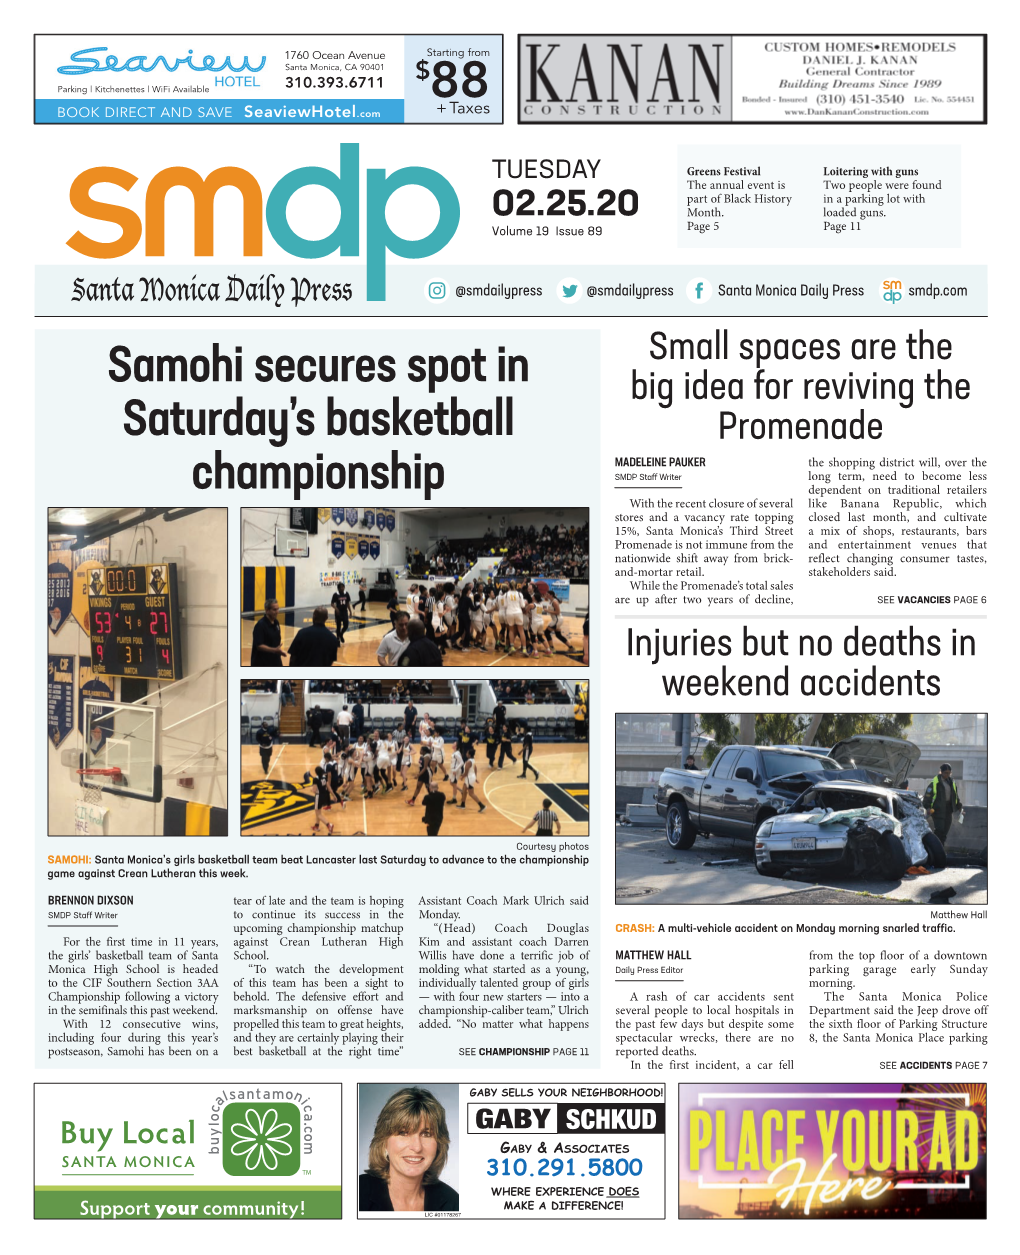 Samohi Secures Spot in Saturday's Basketball Championship